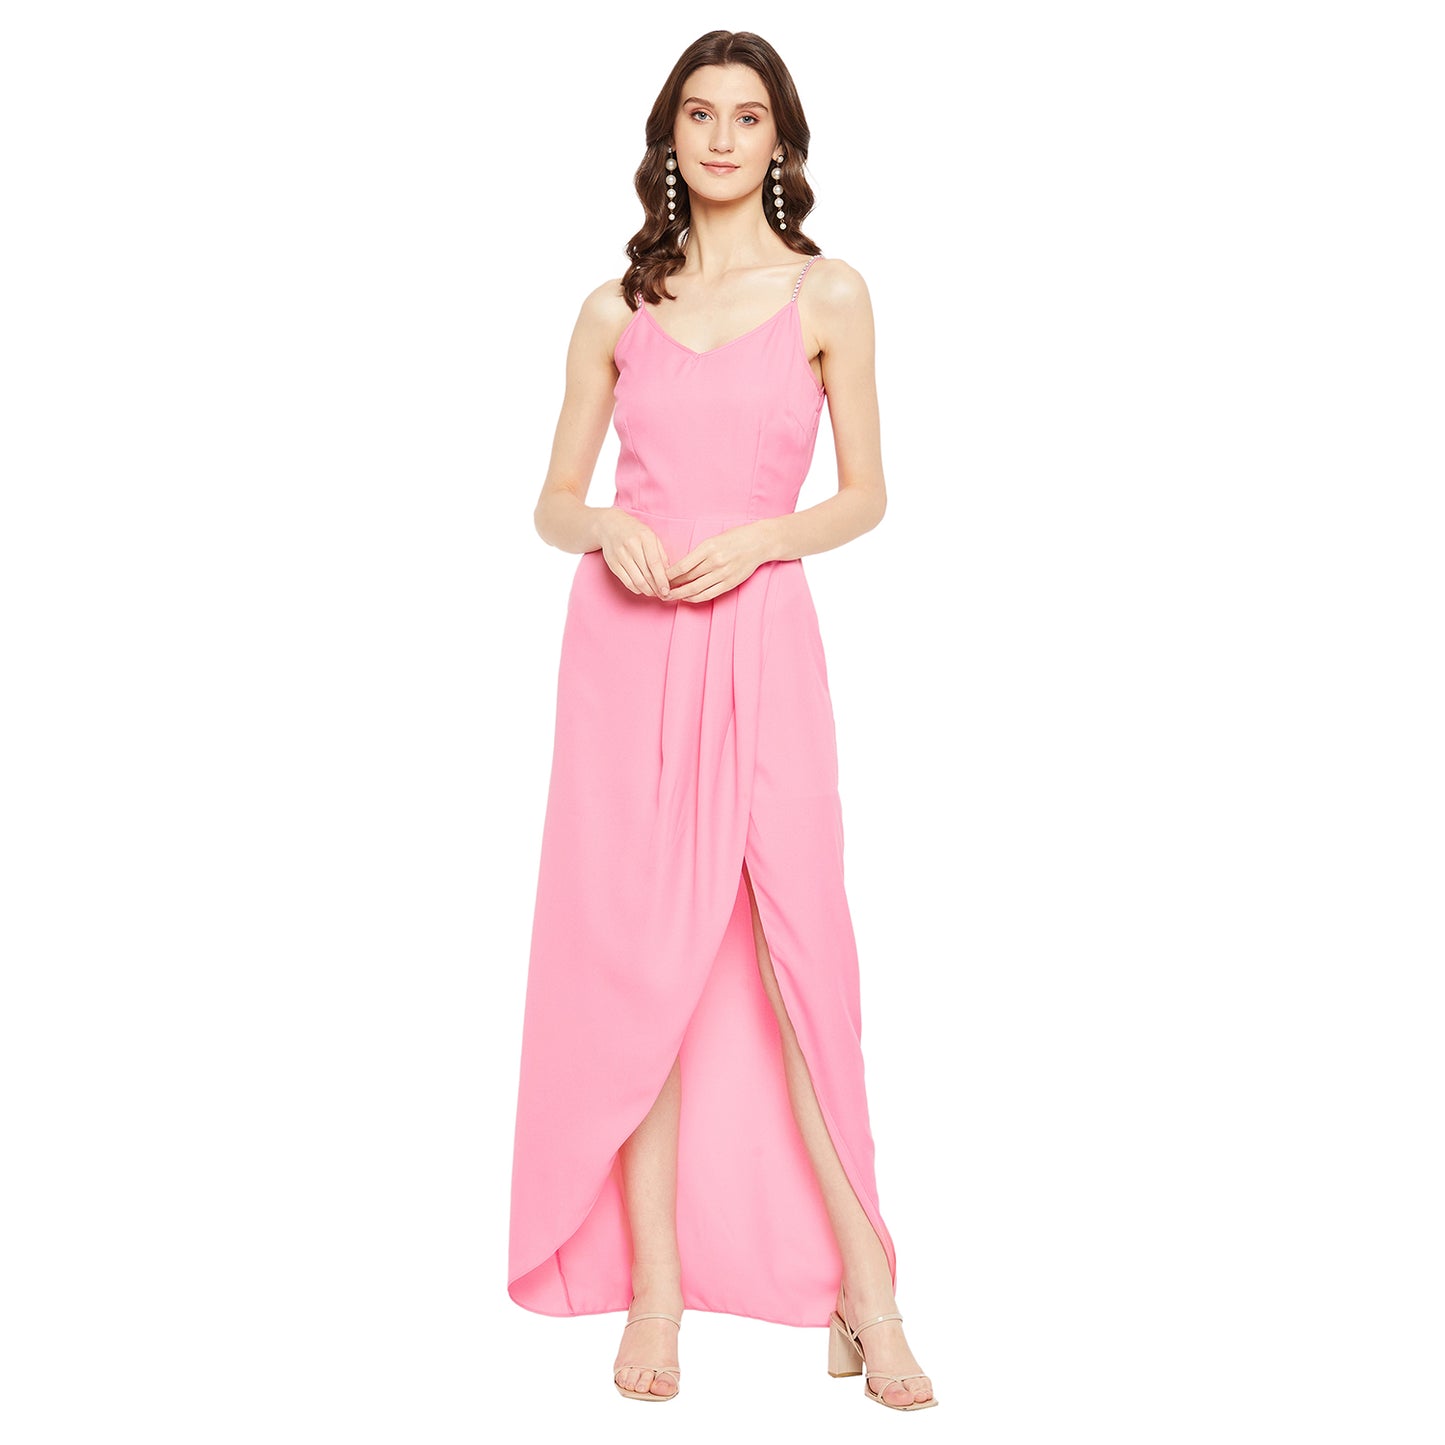 LY2 Pink Overlap Dress With Side Slit